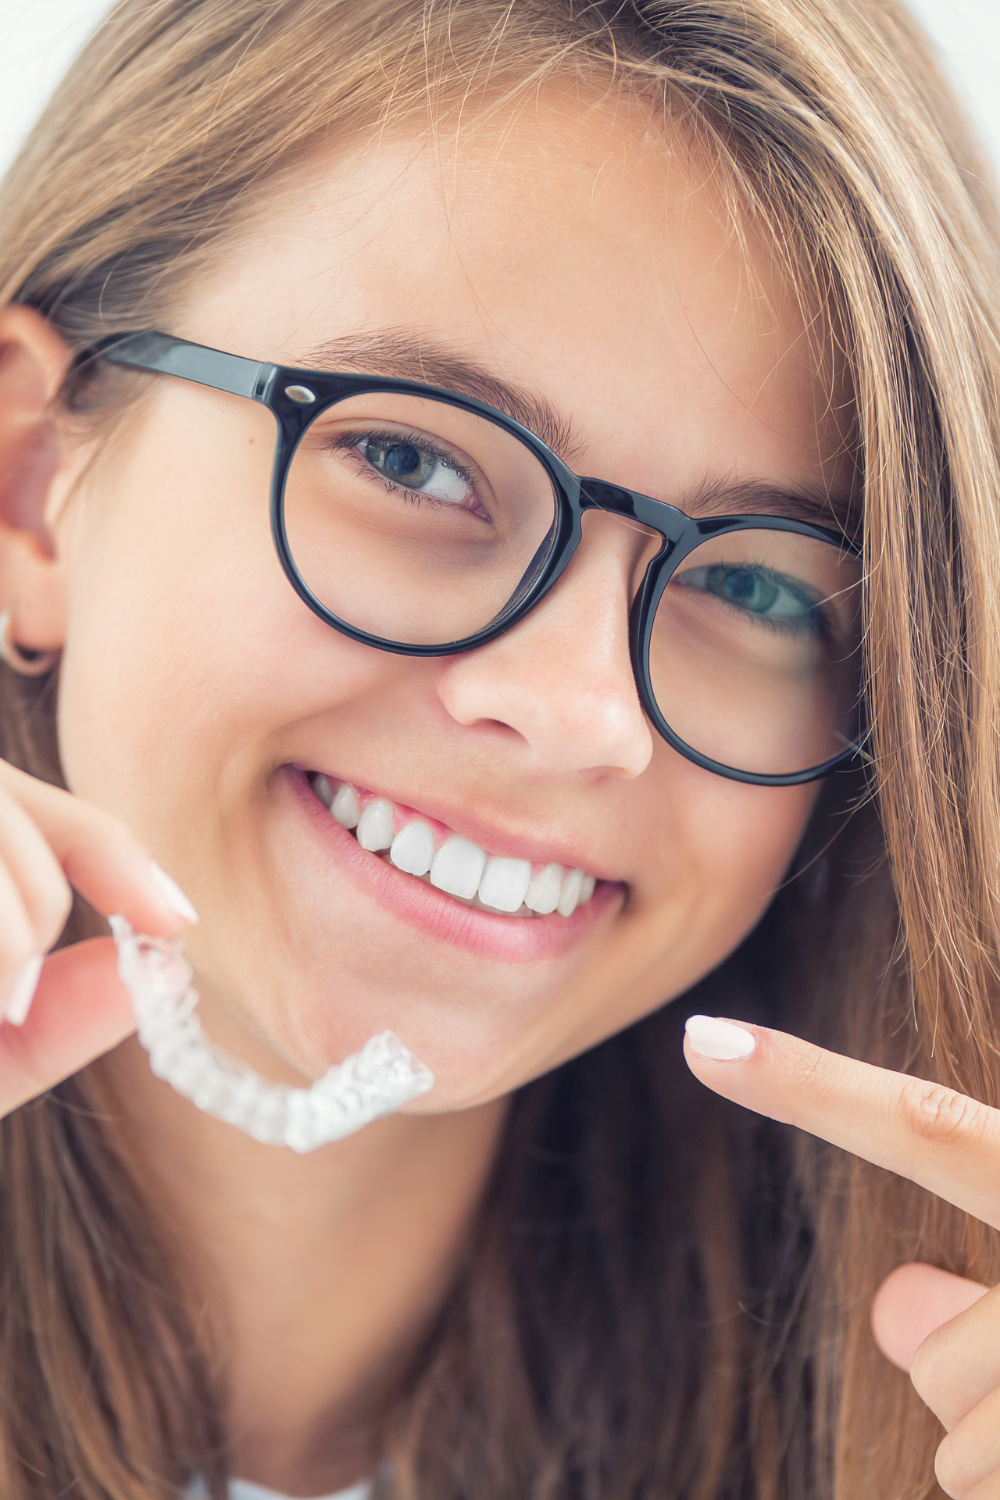 Thinking of Invisalign? Here Are the Benefits You Should Know